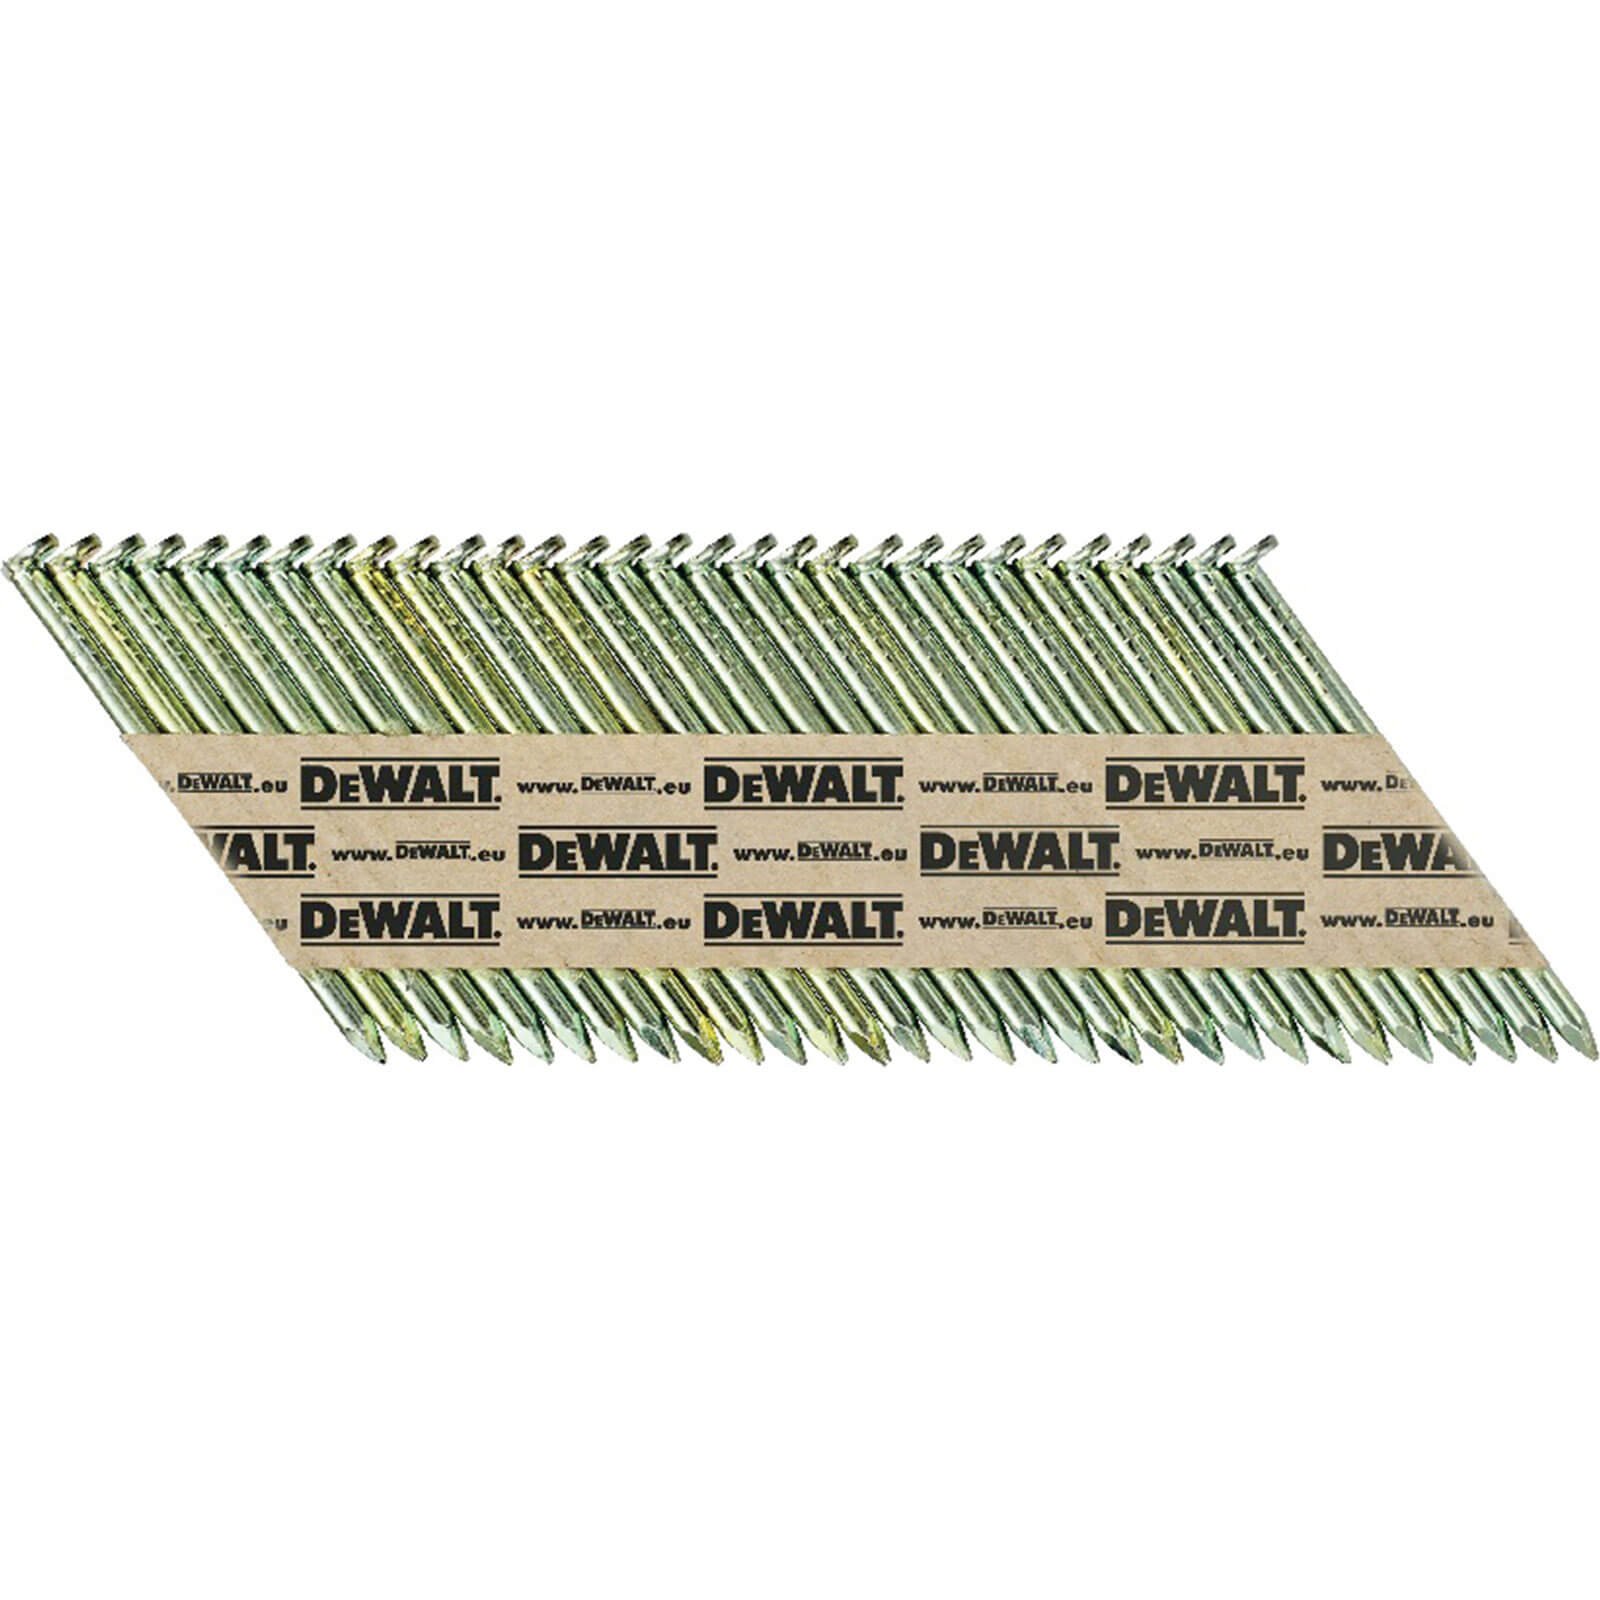 Dewalt 90mm x 3.1mm Smooth Bright Finish 34 Degree Nails Pack of 2200